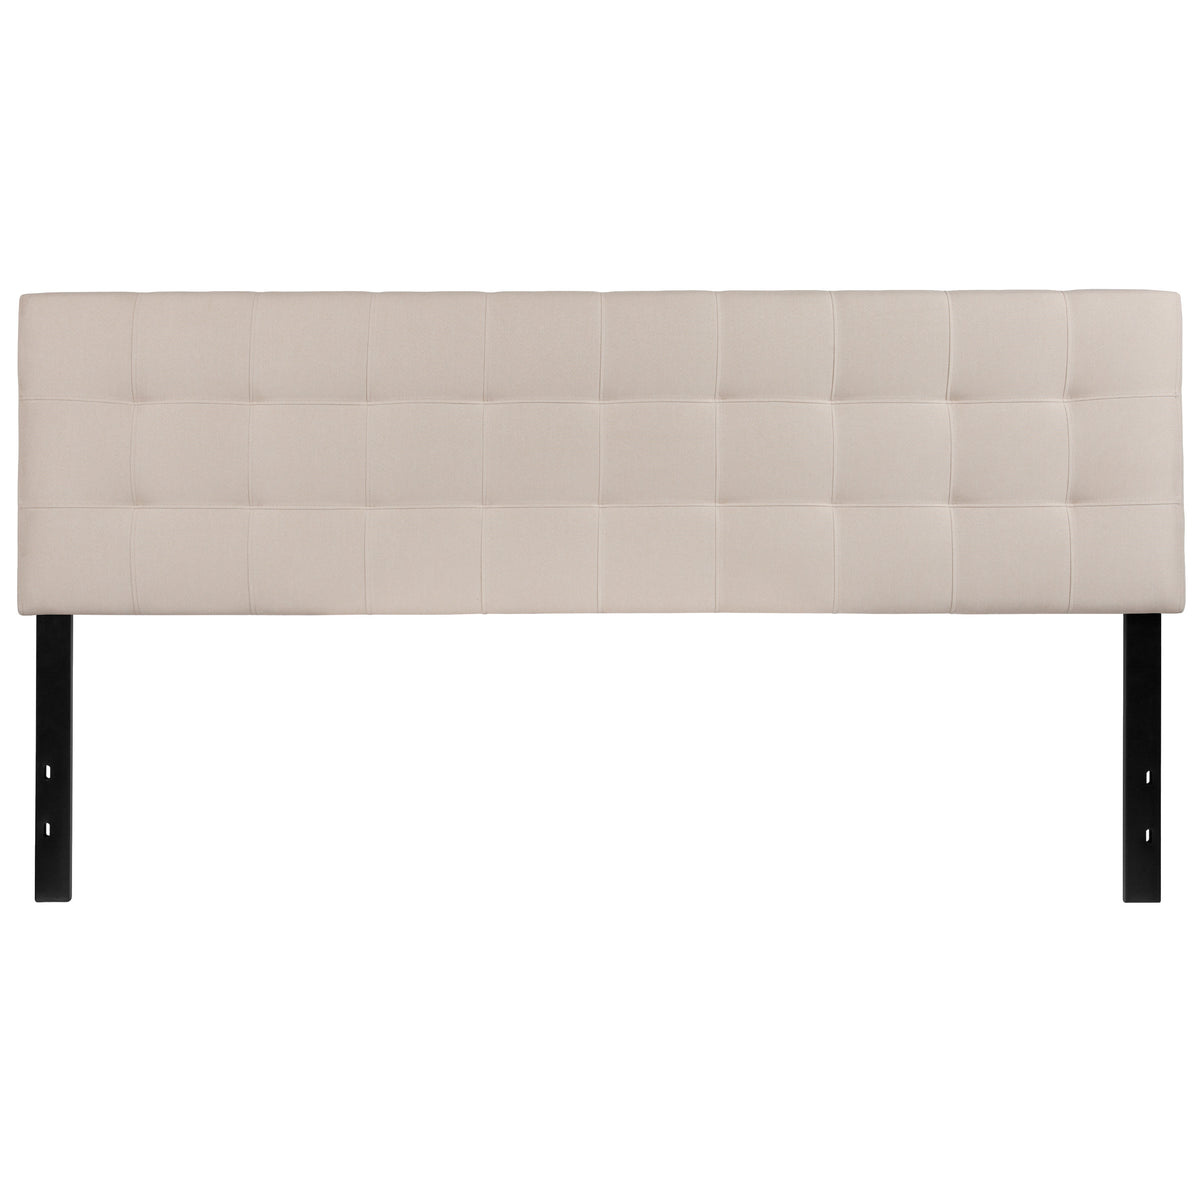 Beige,King |#| Quilted Tufted Upholstered King Size Headboard in Beige Fabric